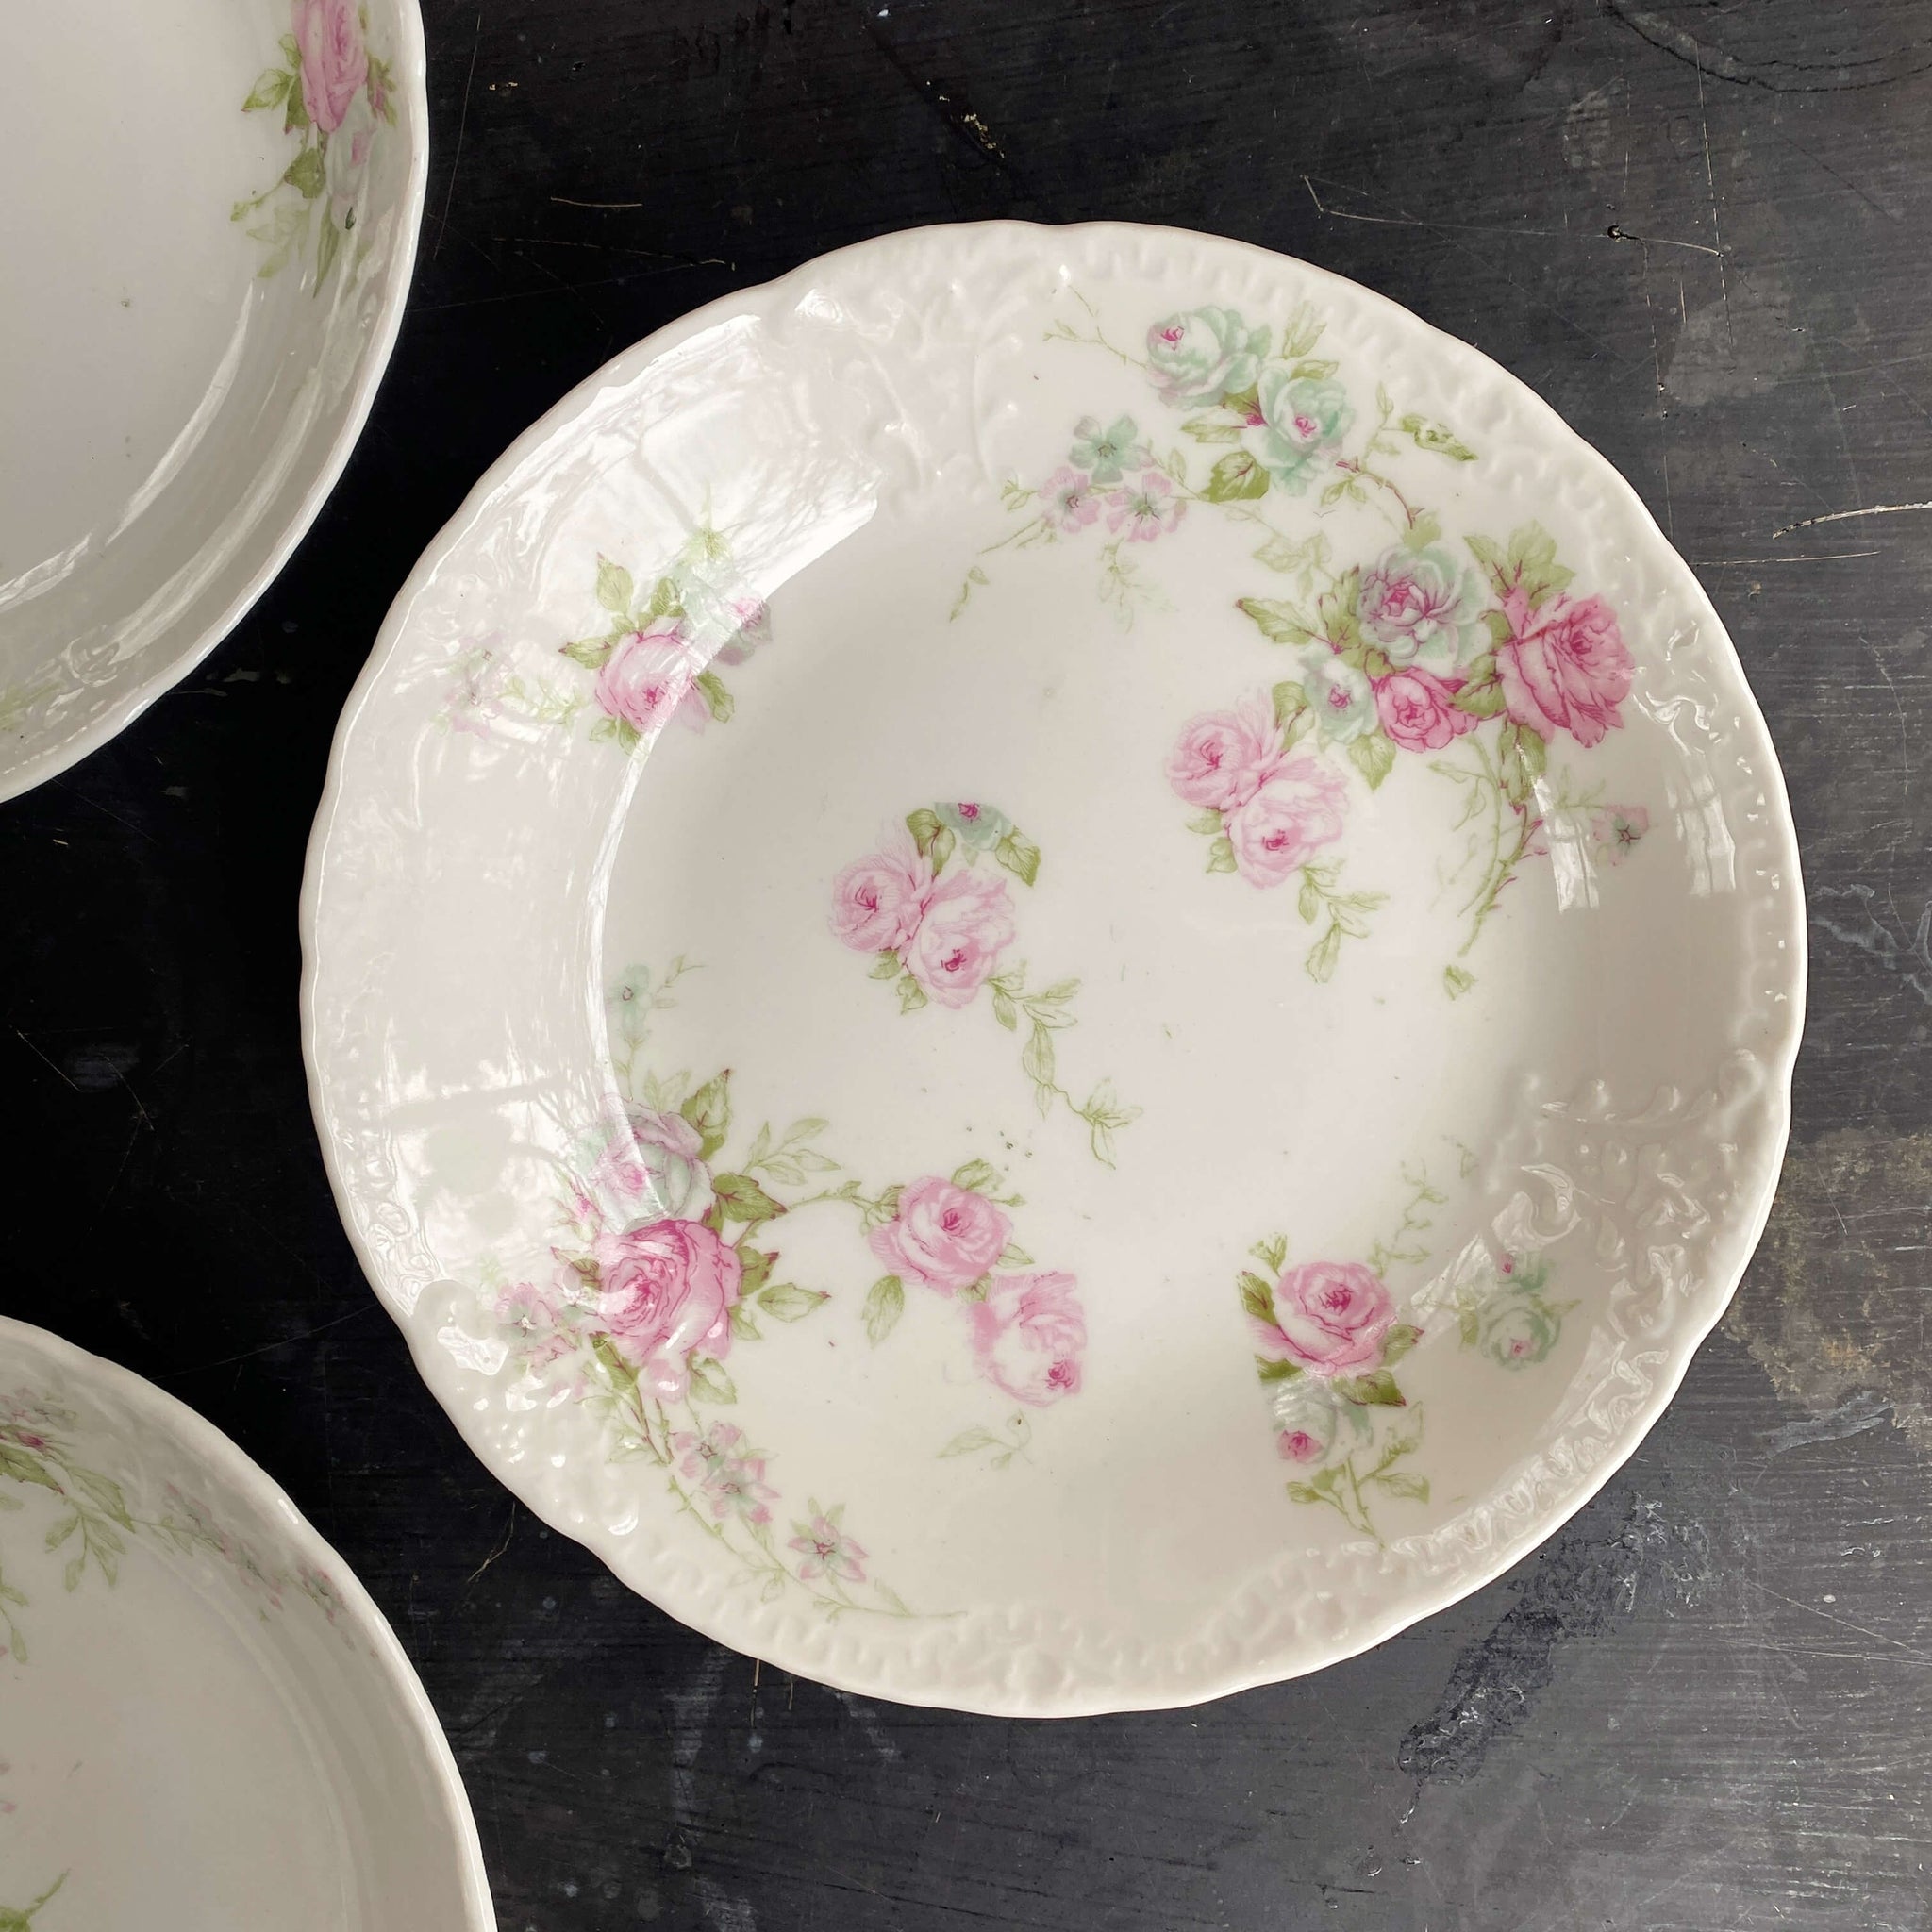 Antique Theodore Haviland Limoges Fruit Bowls circa 1903 - Set of Five -Country French Cabbage Roses